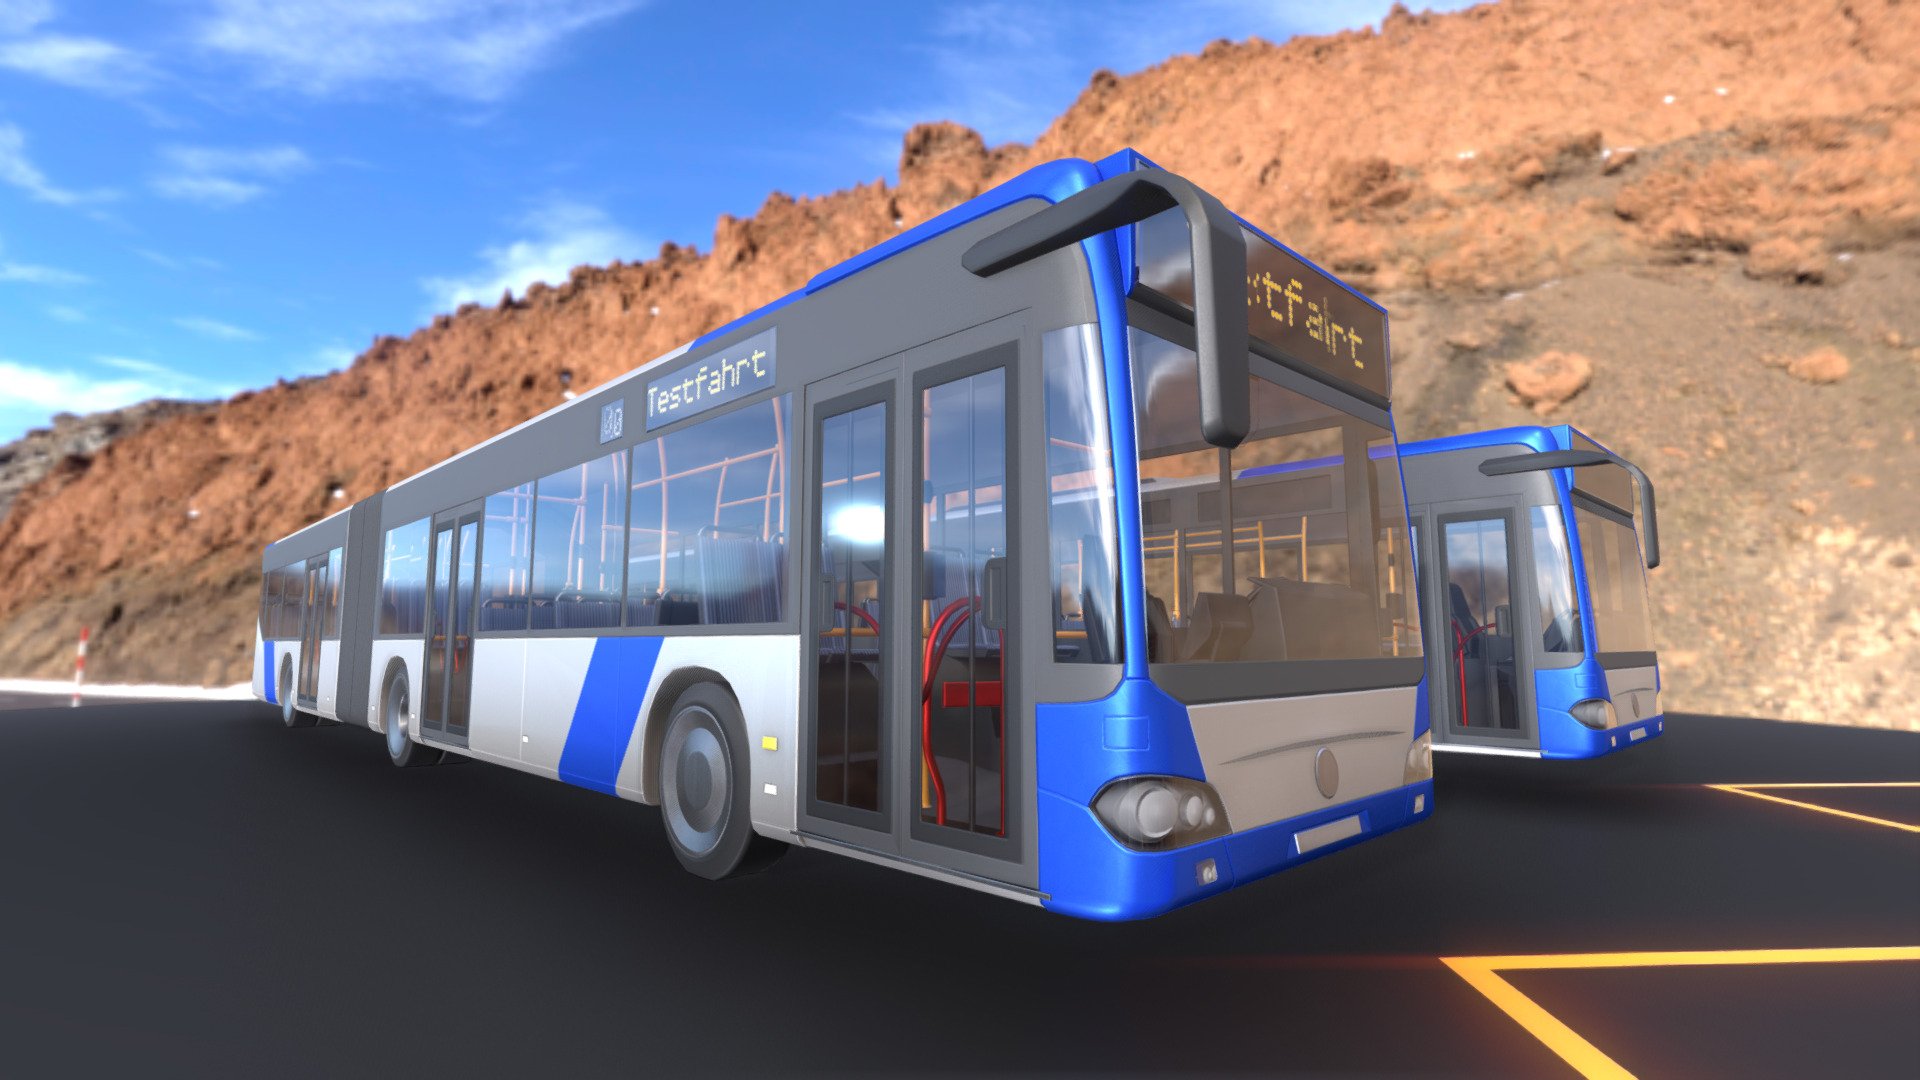 Here is the low-poly and pbr-textured version of the articulated bus in blue-white.






Demo-Video Blender-3.2

Parts and details:




Object Name - Articulated_Bus_NoText 

Object Dimensions -  3.032m x 18.226m x 3.058m 

Vertices = 25064

Polygons = 44537






Object Name - Articulated_Bus_TestfahrtText 

Object Dimensions -  3.032m x 18.226m x 3.058m

Vertices = 27893

Polygons = 46904






Object rotation and location is 0, scale is 1.000 x 1.000 x 1.000

Object center point is where it should be, so you can place the object easily on your ground

Texture map types: Base Color, Normal, Metalness, Roughness



3D model formats: 




Native format (*.blend)

Autodesk FBX (.fbx)

OBJ (.obj, .mtl)

glTF (.gltf, .glb)

X3D (.x3d)

Collada (.dae)

Stereolithography (.stl)

Polygon File Format (.ply)

Alembic (.abc)

DXF (.dxf)

USDC



Last update:
13:02:35  19.10.22


 - Articulated City Bus Blue-White (Low-Poly) - Buy Royalty Free 3D model by VIS-All-3D (@VIS-All) 3d model